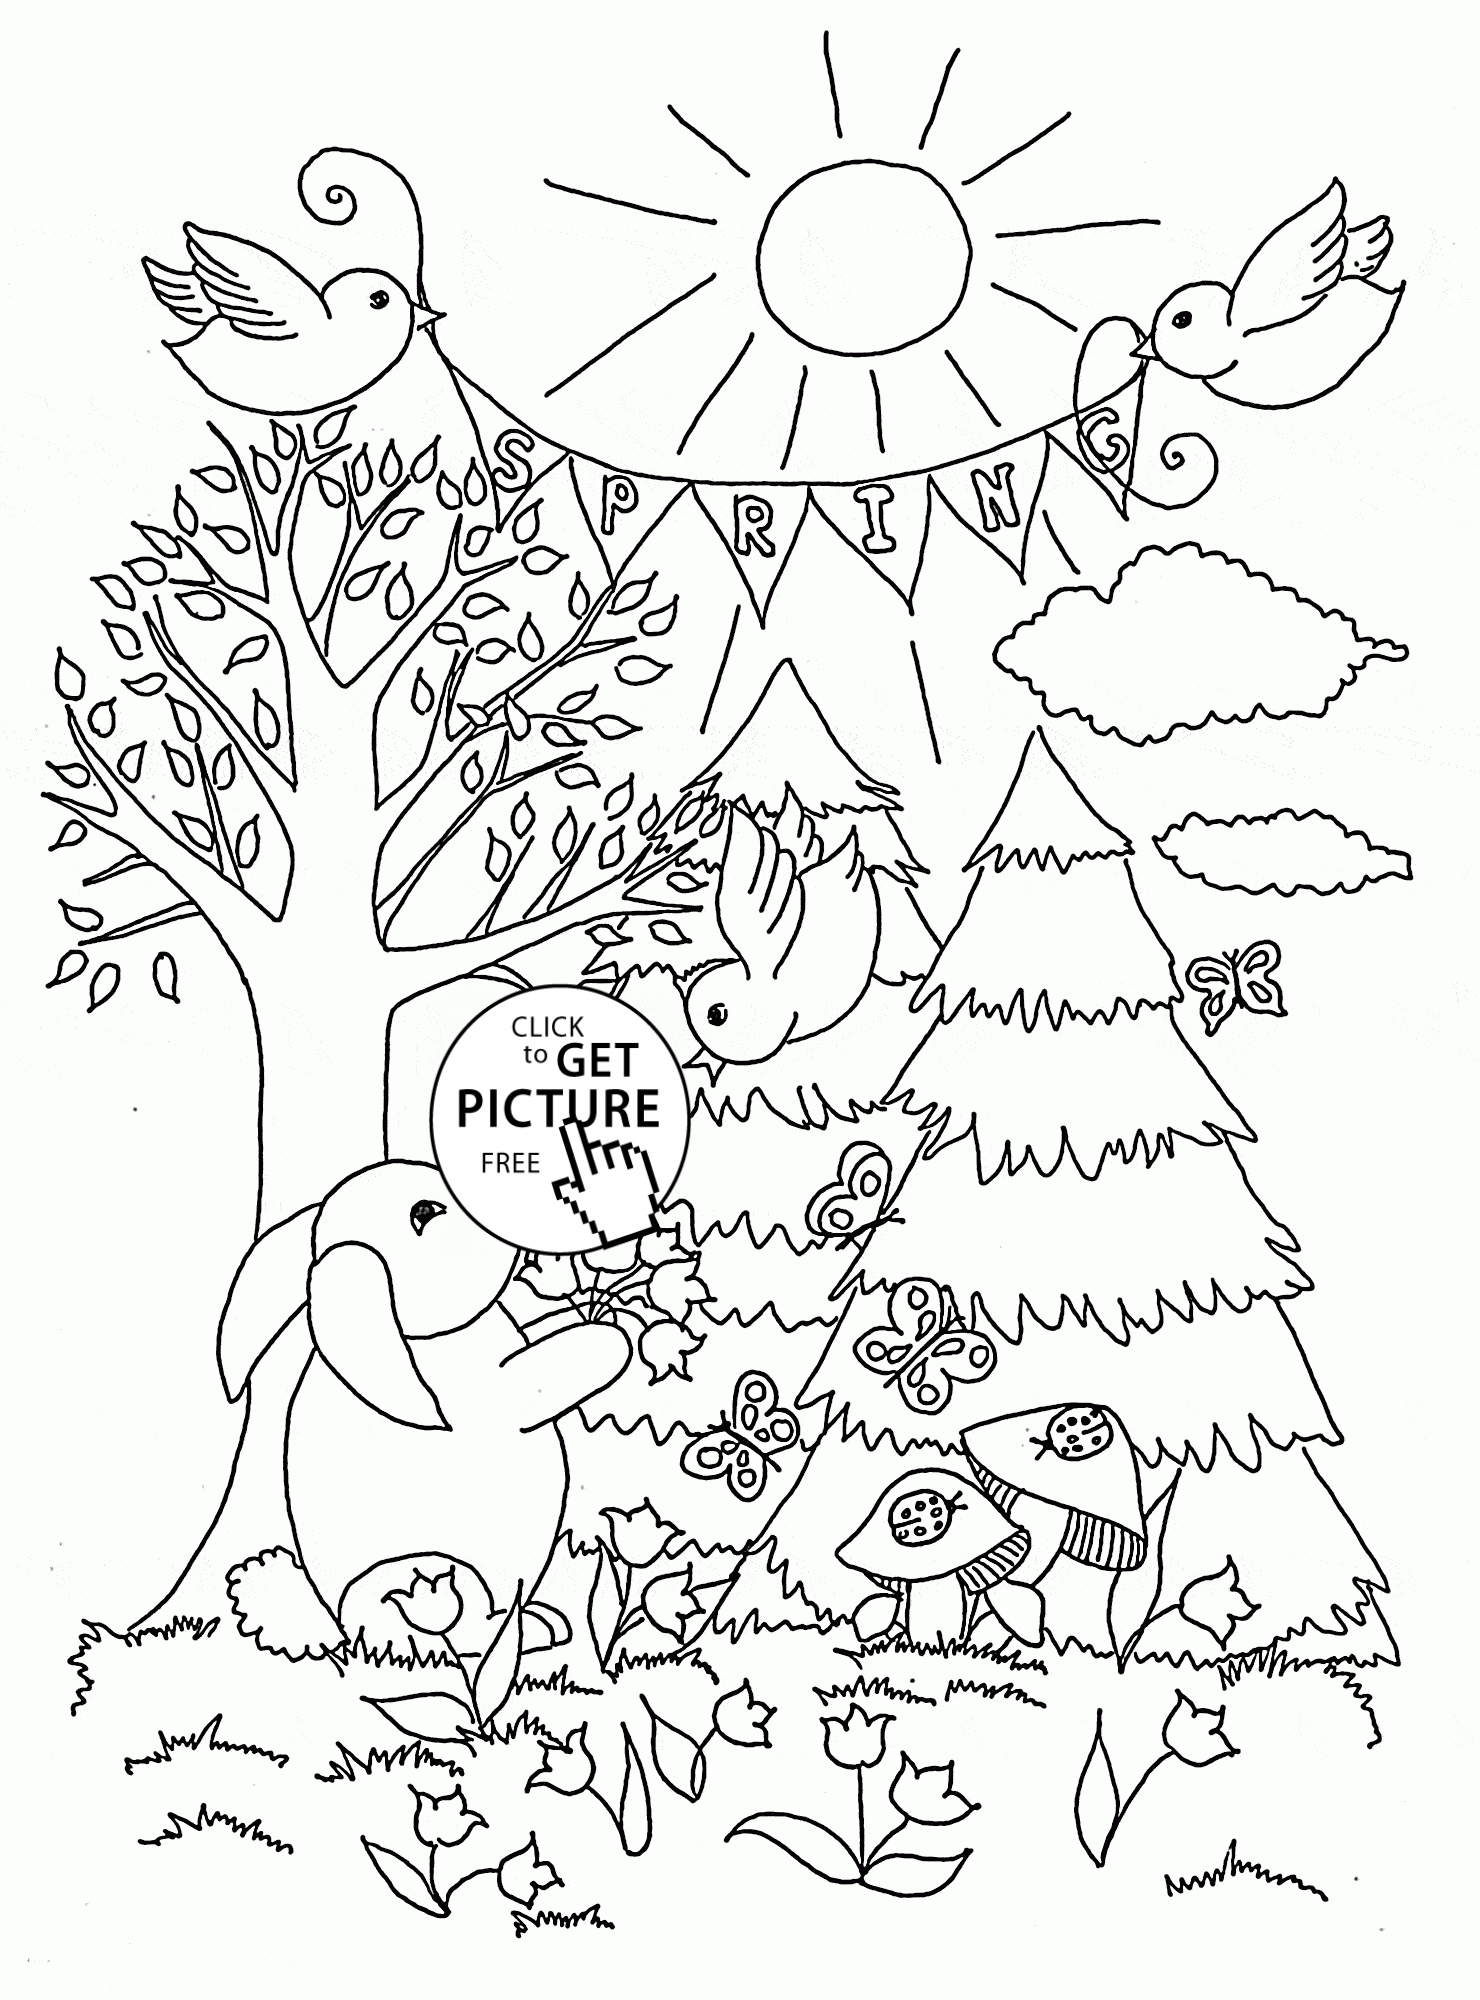 Colouring Pages Forest Animals - SonQuest Rainforest Coloring Mural by